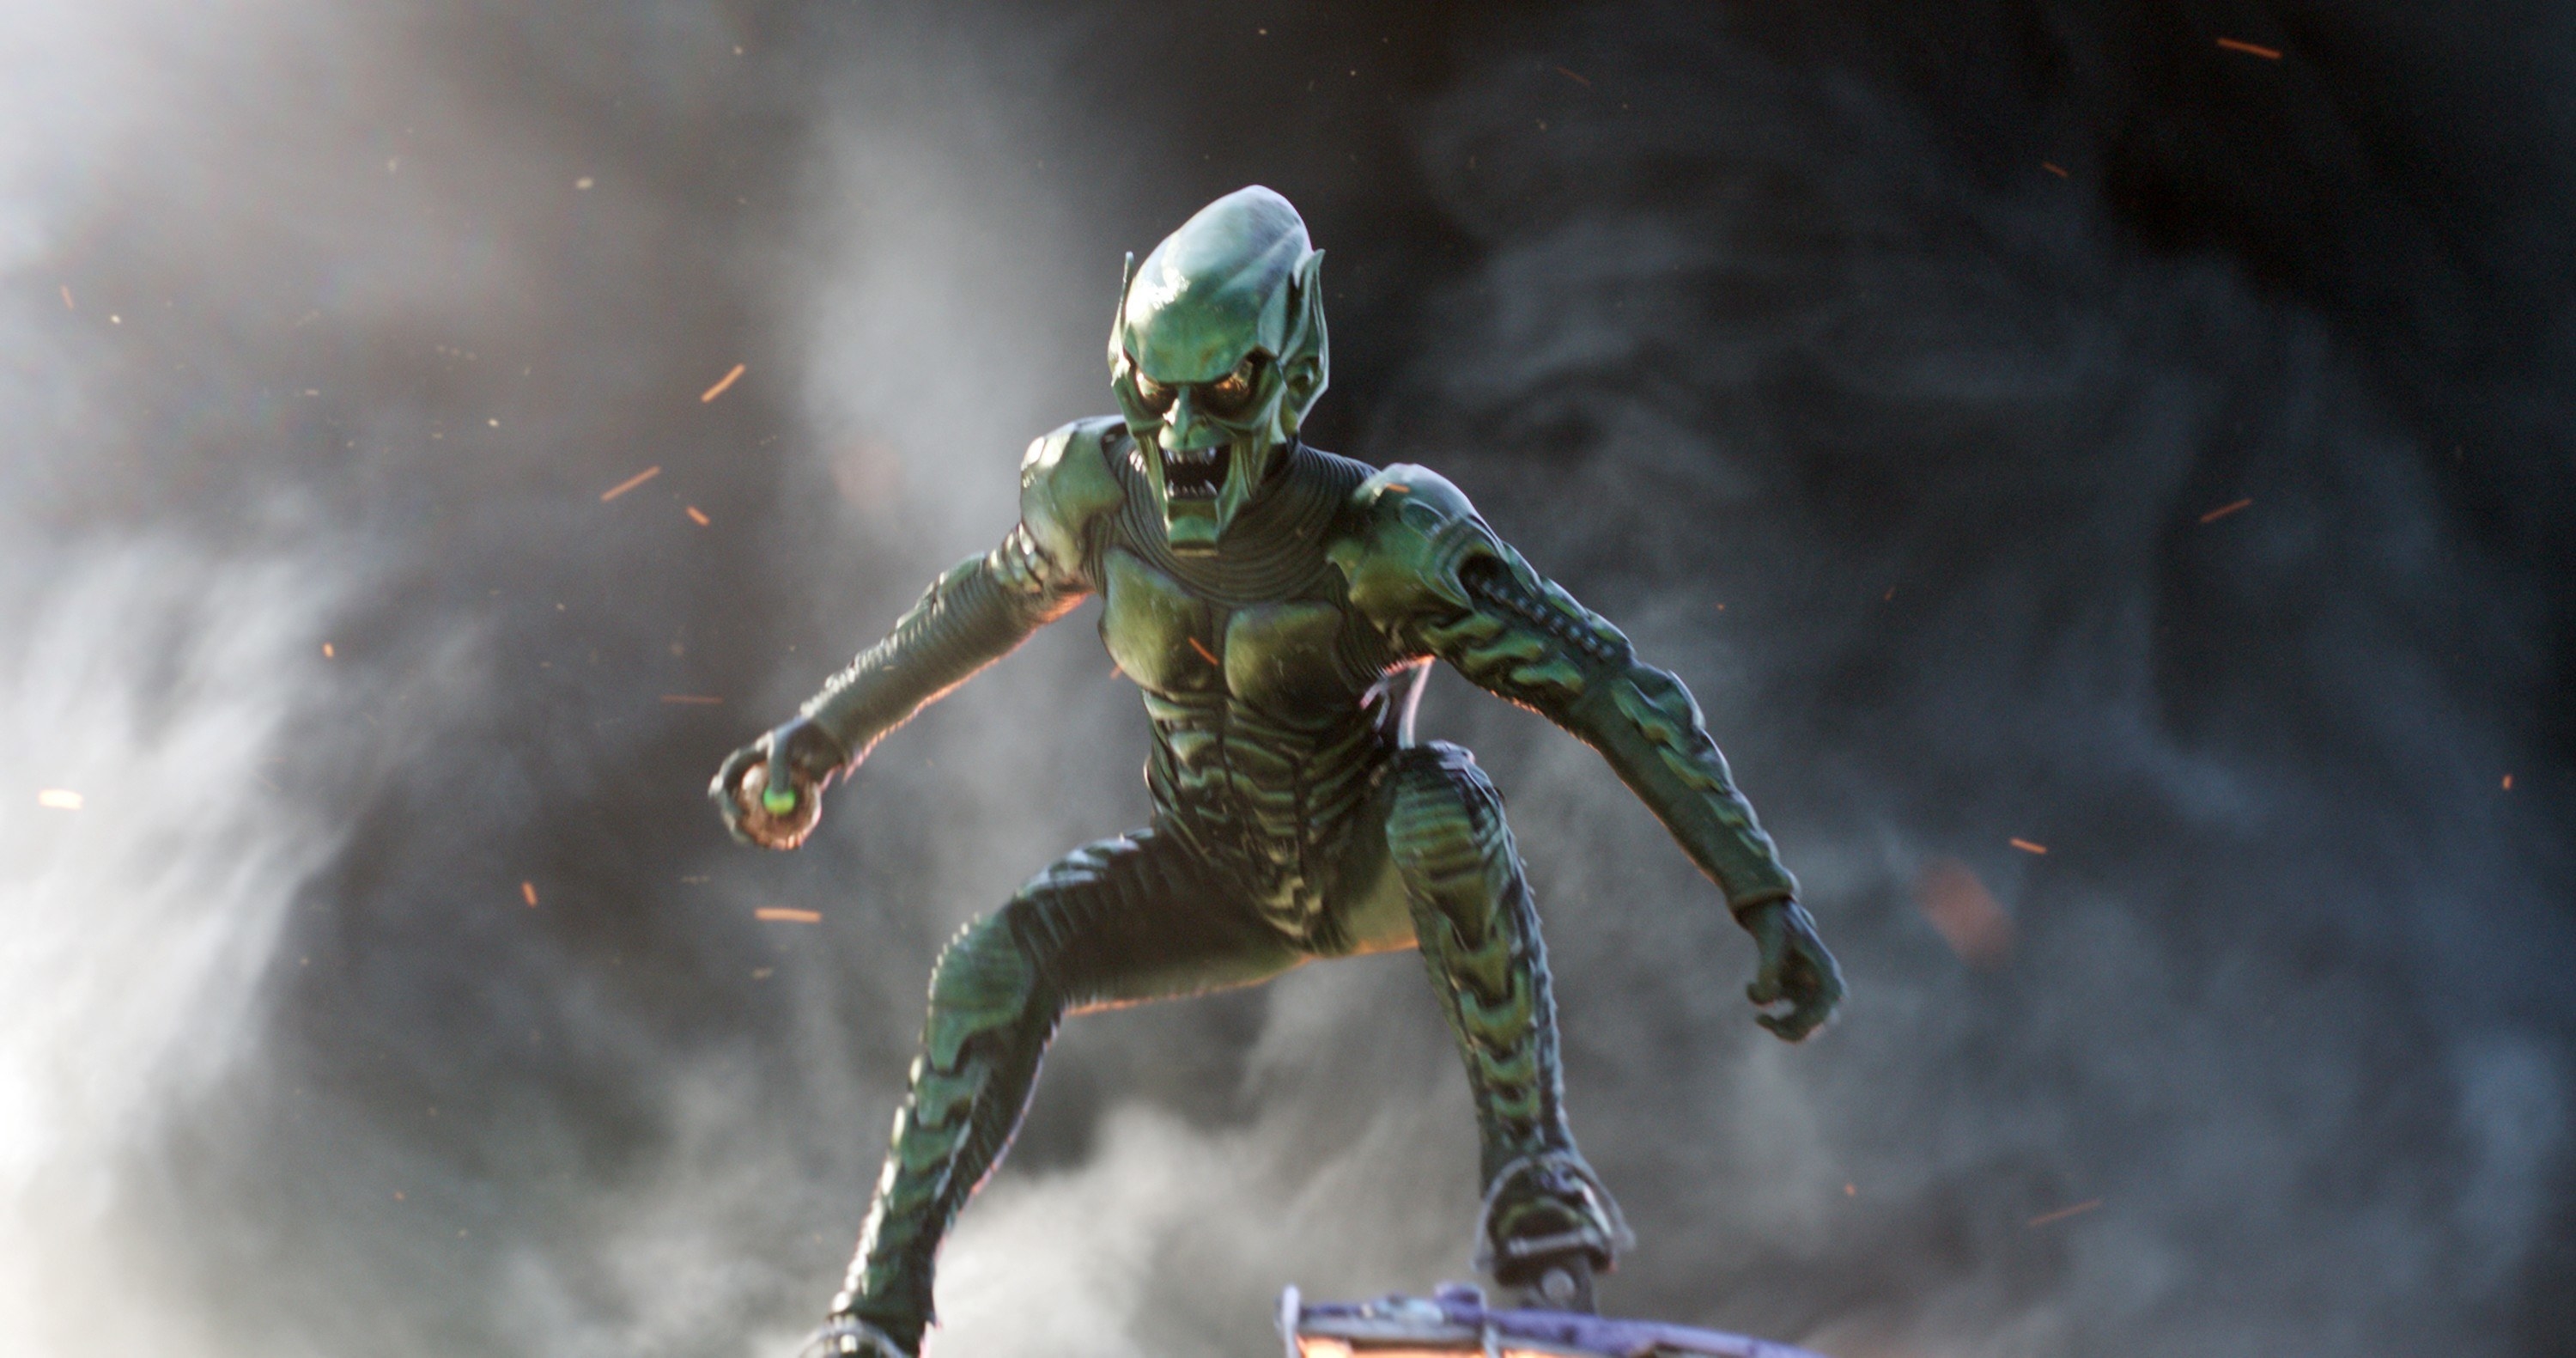 Green Goblin floats in on his hoverboard